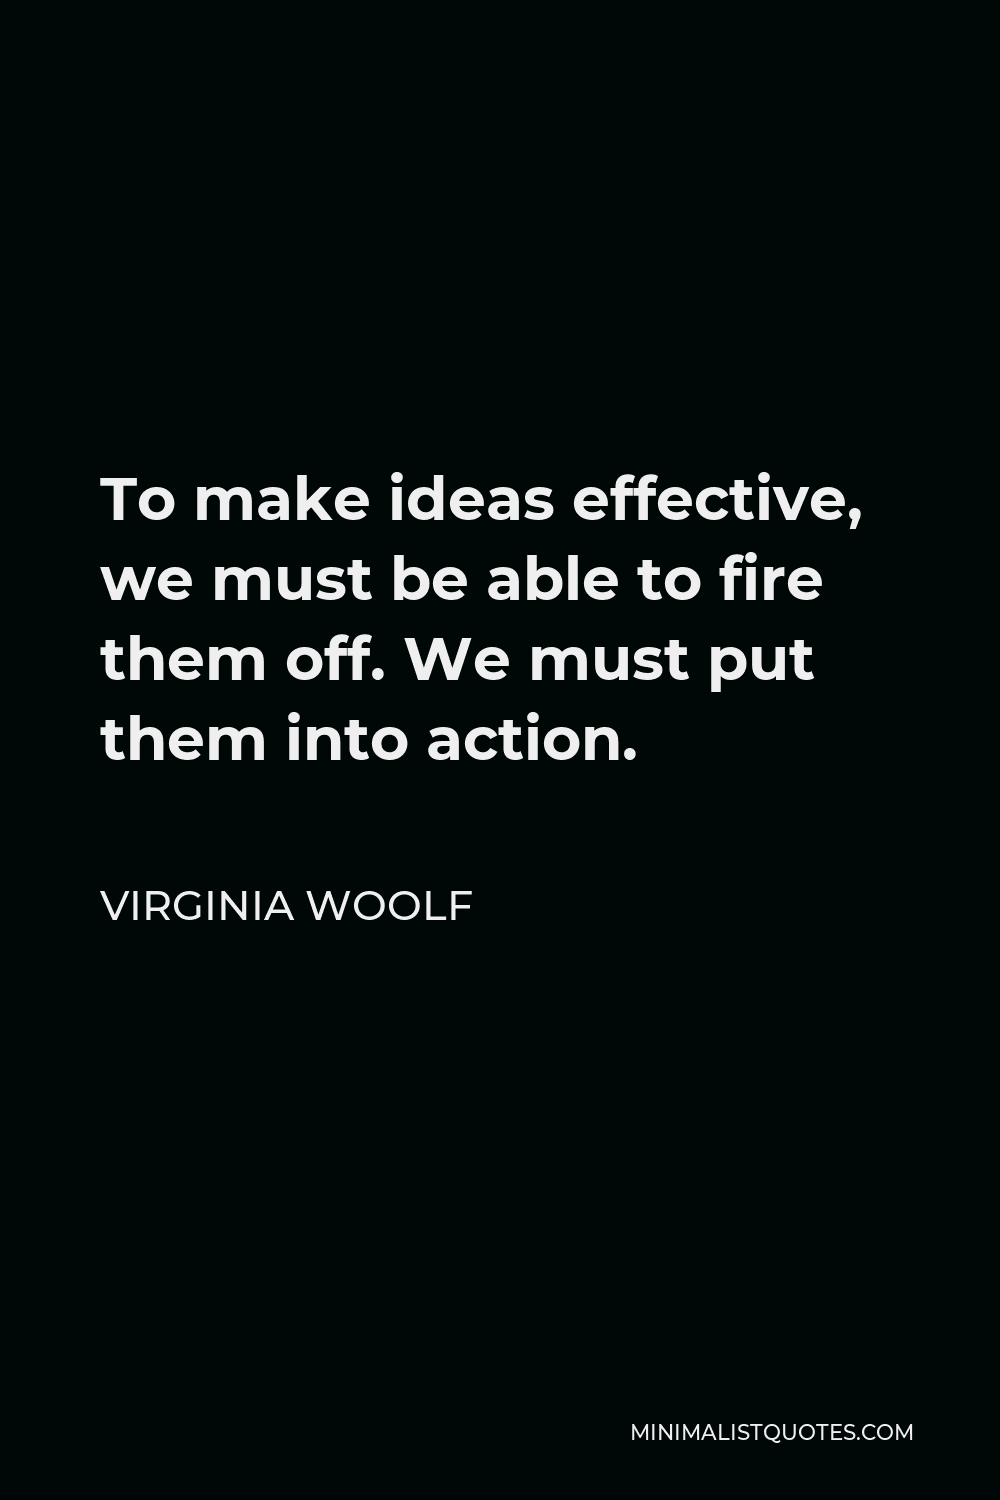 Virginia Woolf Quote - To make ideas effective, we must be able to fire them off. We must put them into action.